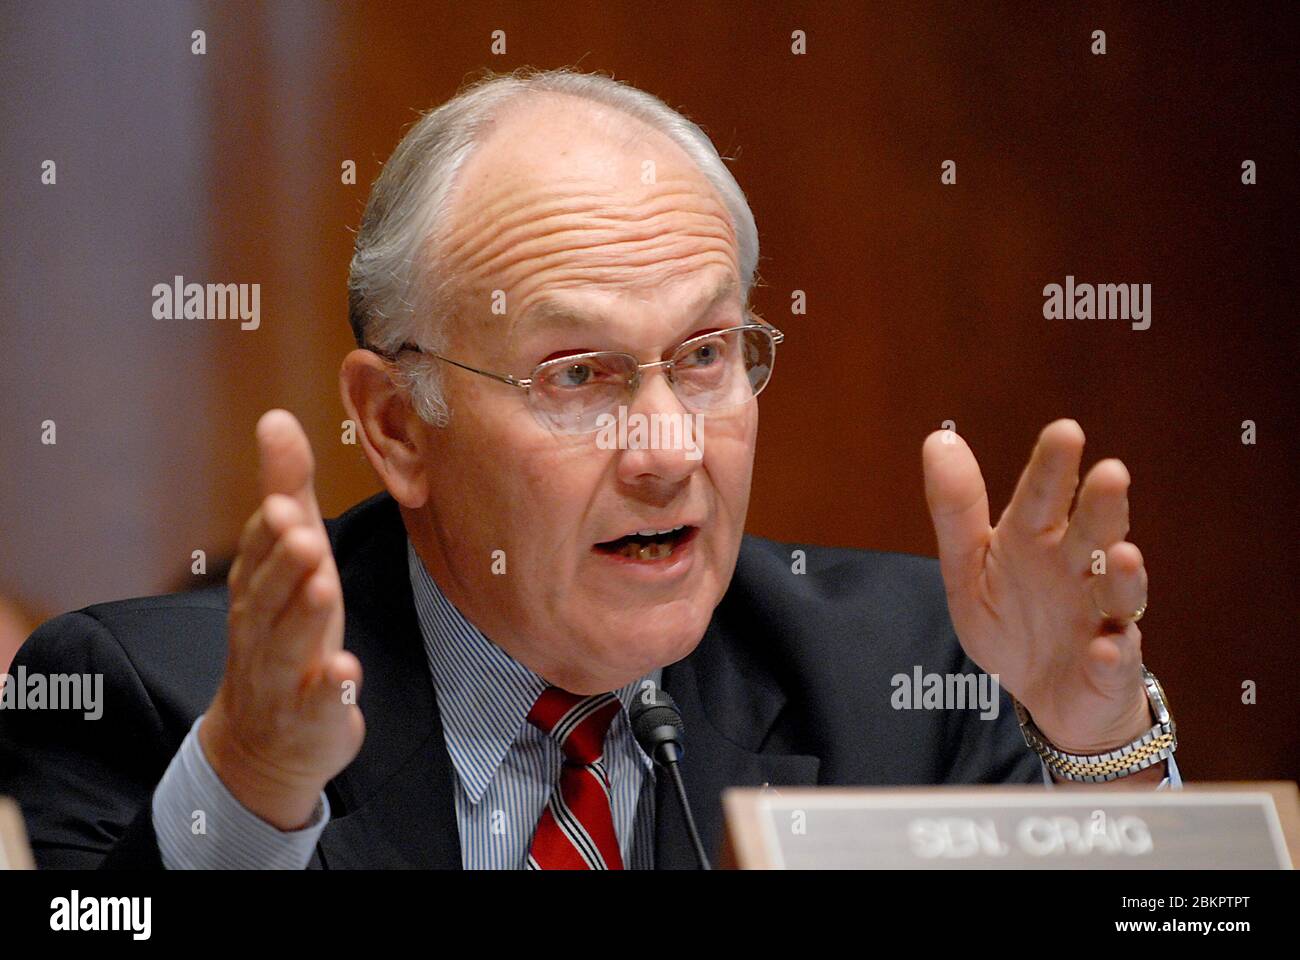 Washington, DC - September 24, 2007 -- United States Senator Larry Craig (Republican of Idaho) questions a witness during a United States Senate Committee on Energy and Natural Resources hearing on Capitol Hill in Washington, DC on Monday, September 24, 2007. Craig is expected to resign from the Senate this week unless his guilty plea to disorderly conduct charges stemming from his June 11, 2007 arrest during a sting operation in a restroom at Minneapolis-St. Paul International Airport is overturned. Credit: Ron Sachs | usage worldwide Stock Photo